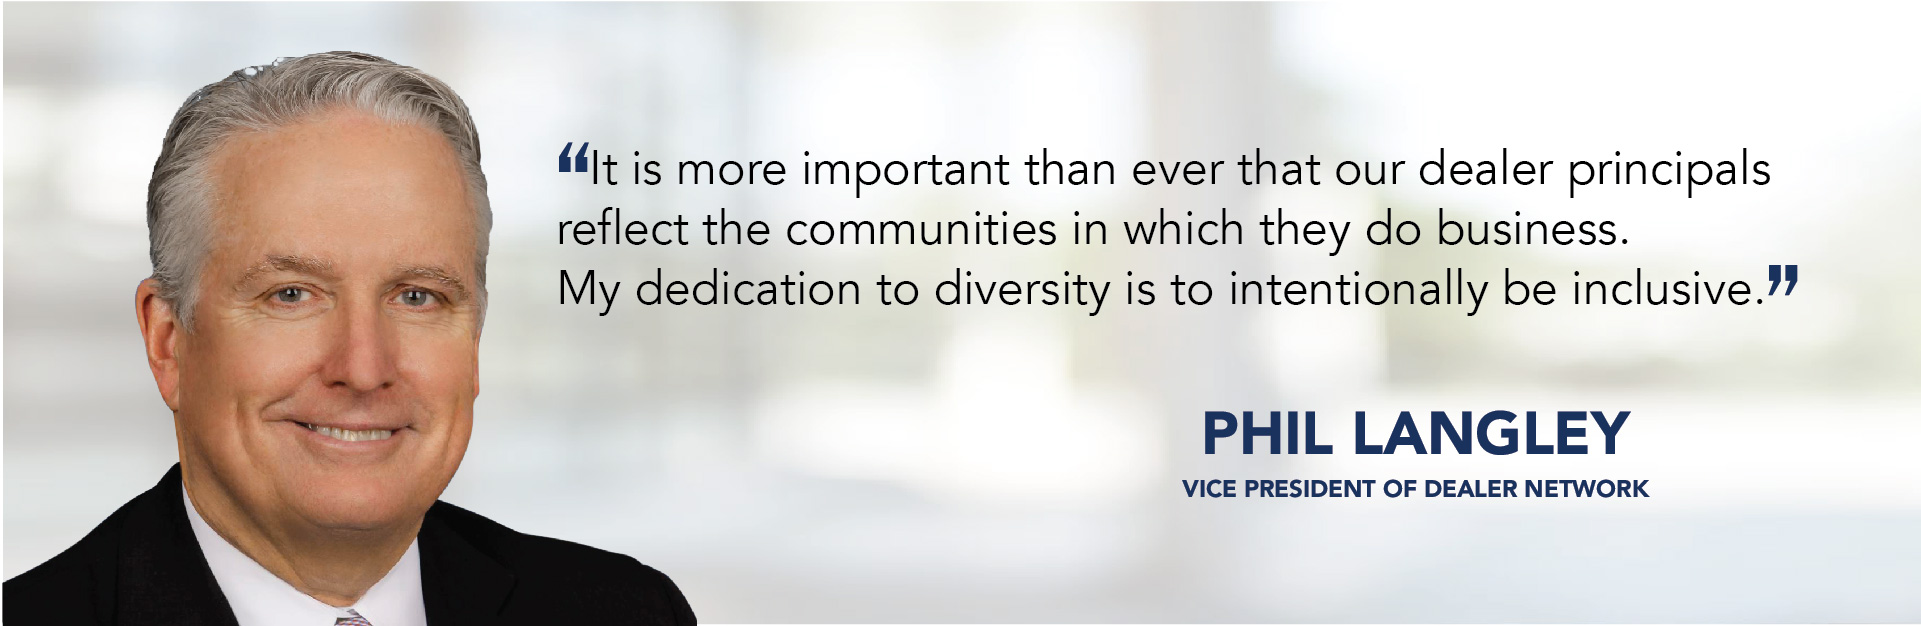 It is more important than ever that our dealer principals reflect the communities in which they do business. My dedication to diversity is to intentionally be inclusive. - Phil Langley